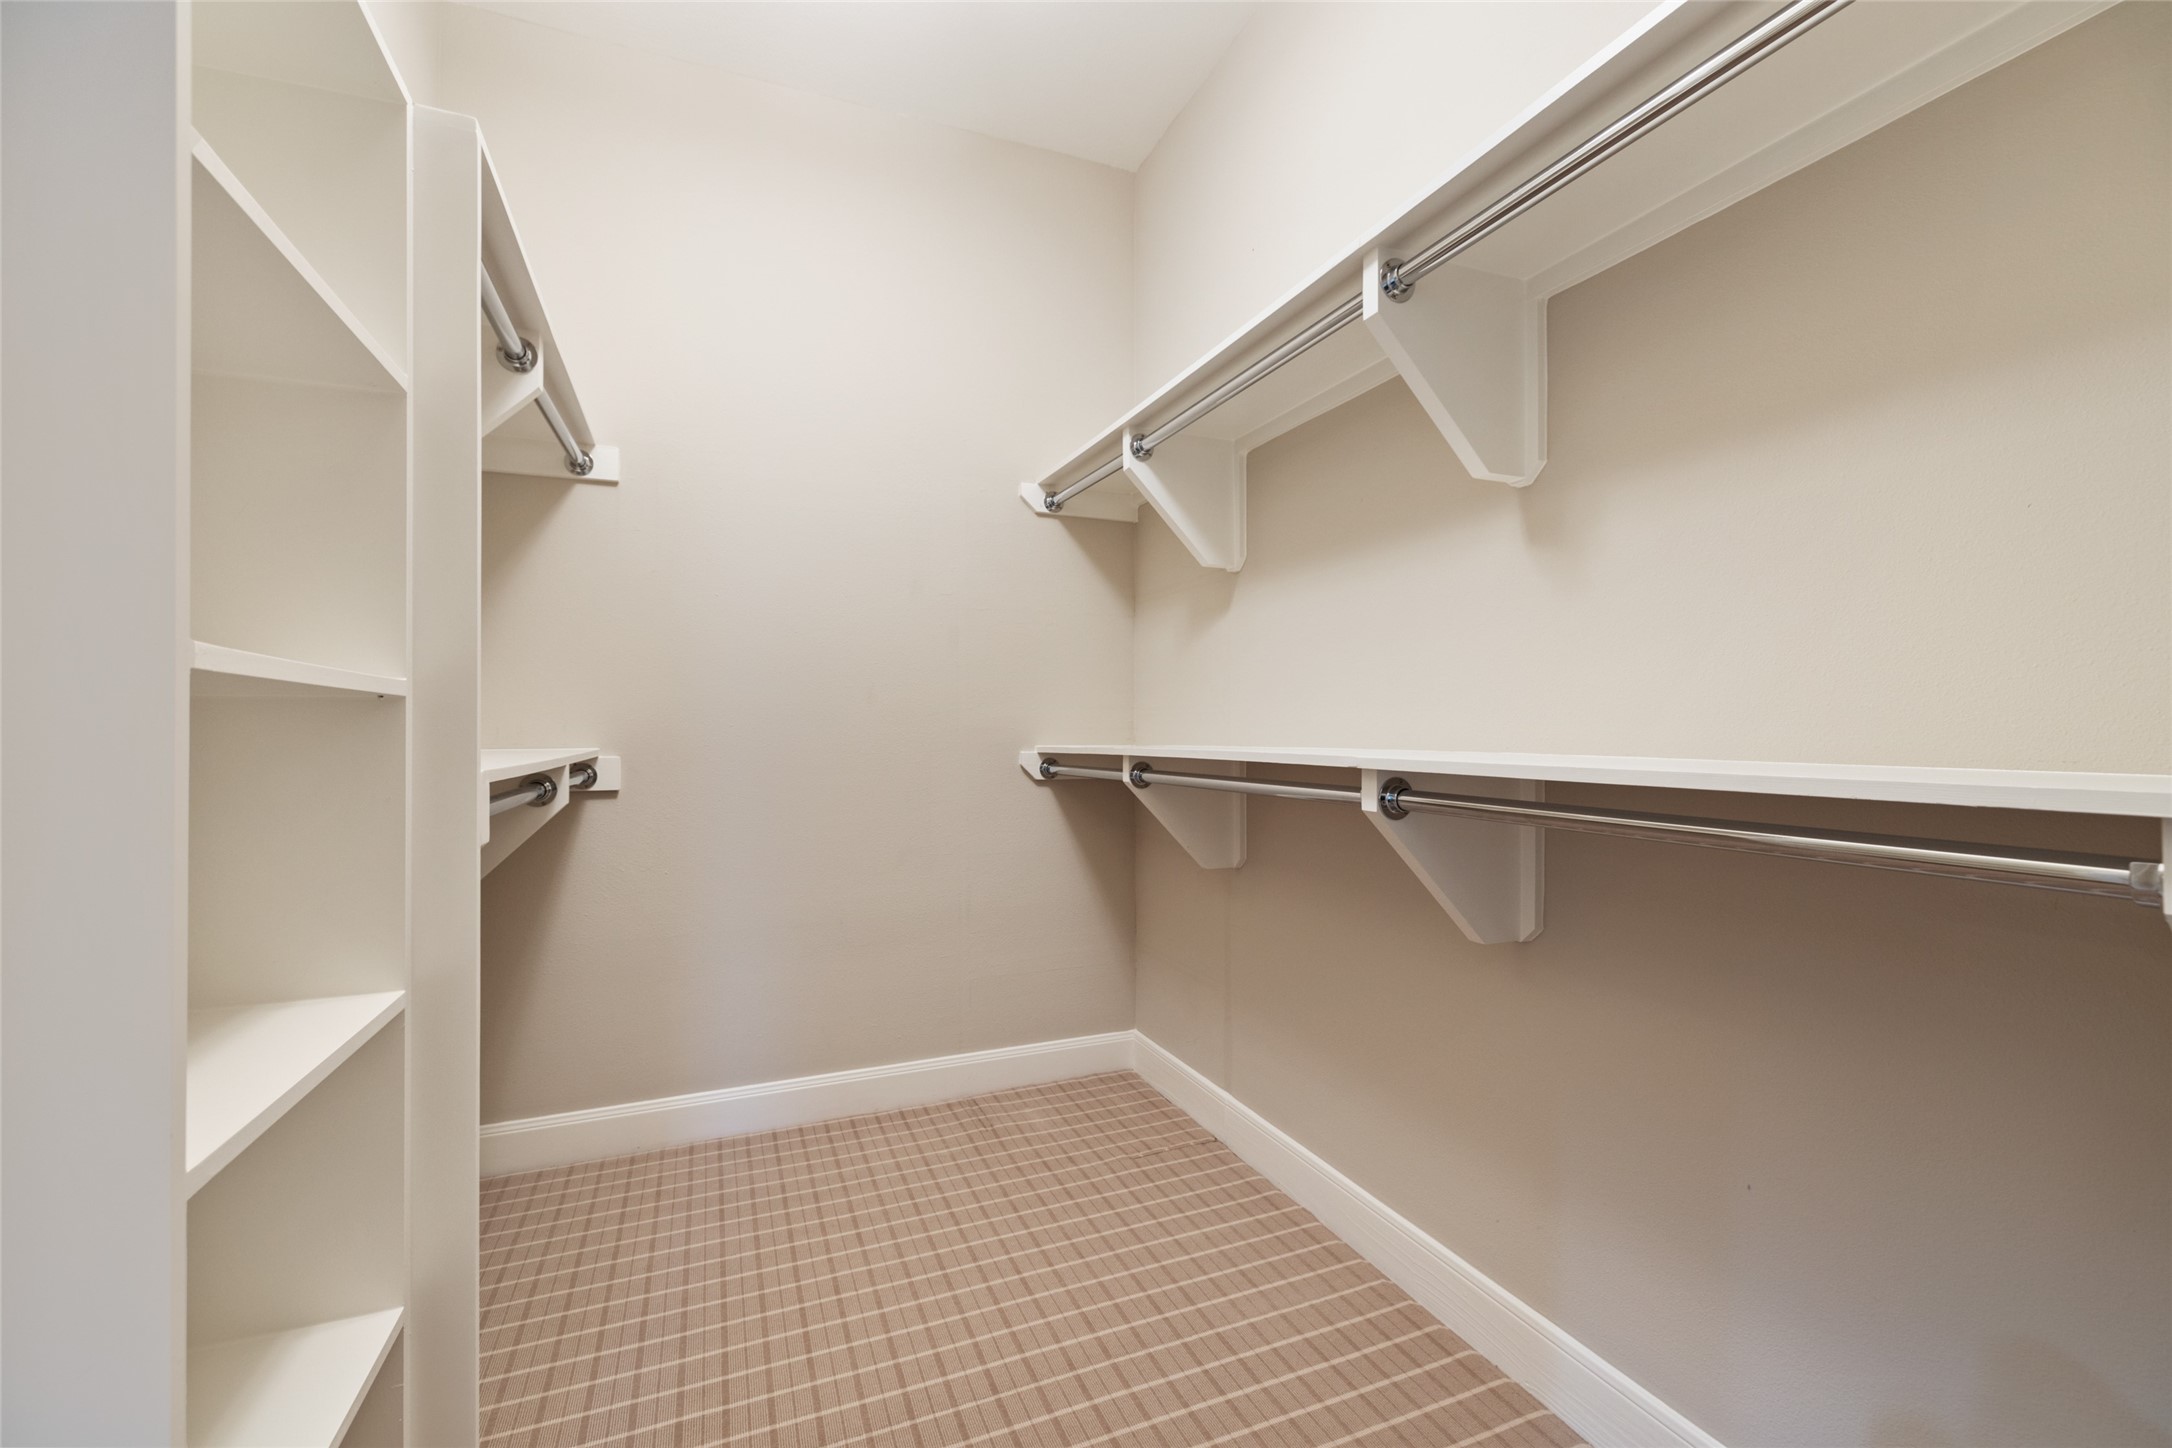 Ample sized closets add form and function to this beautiful high rise unit.